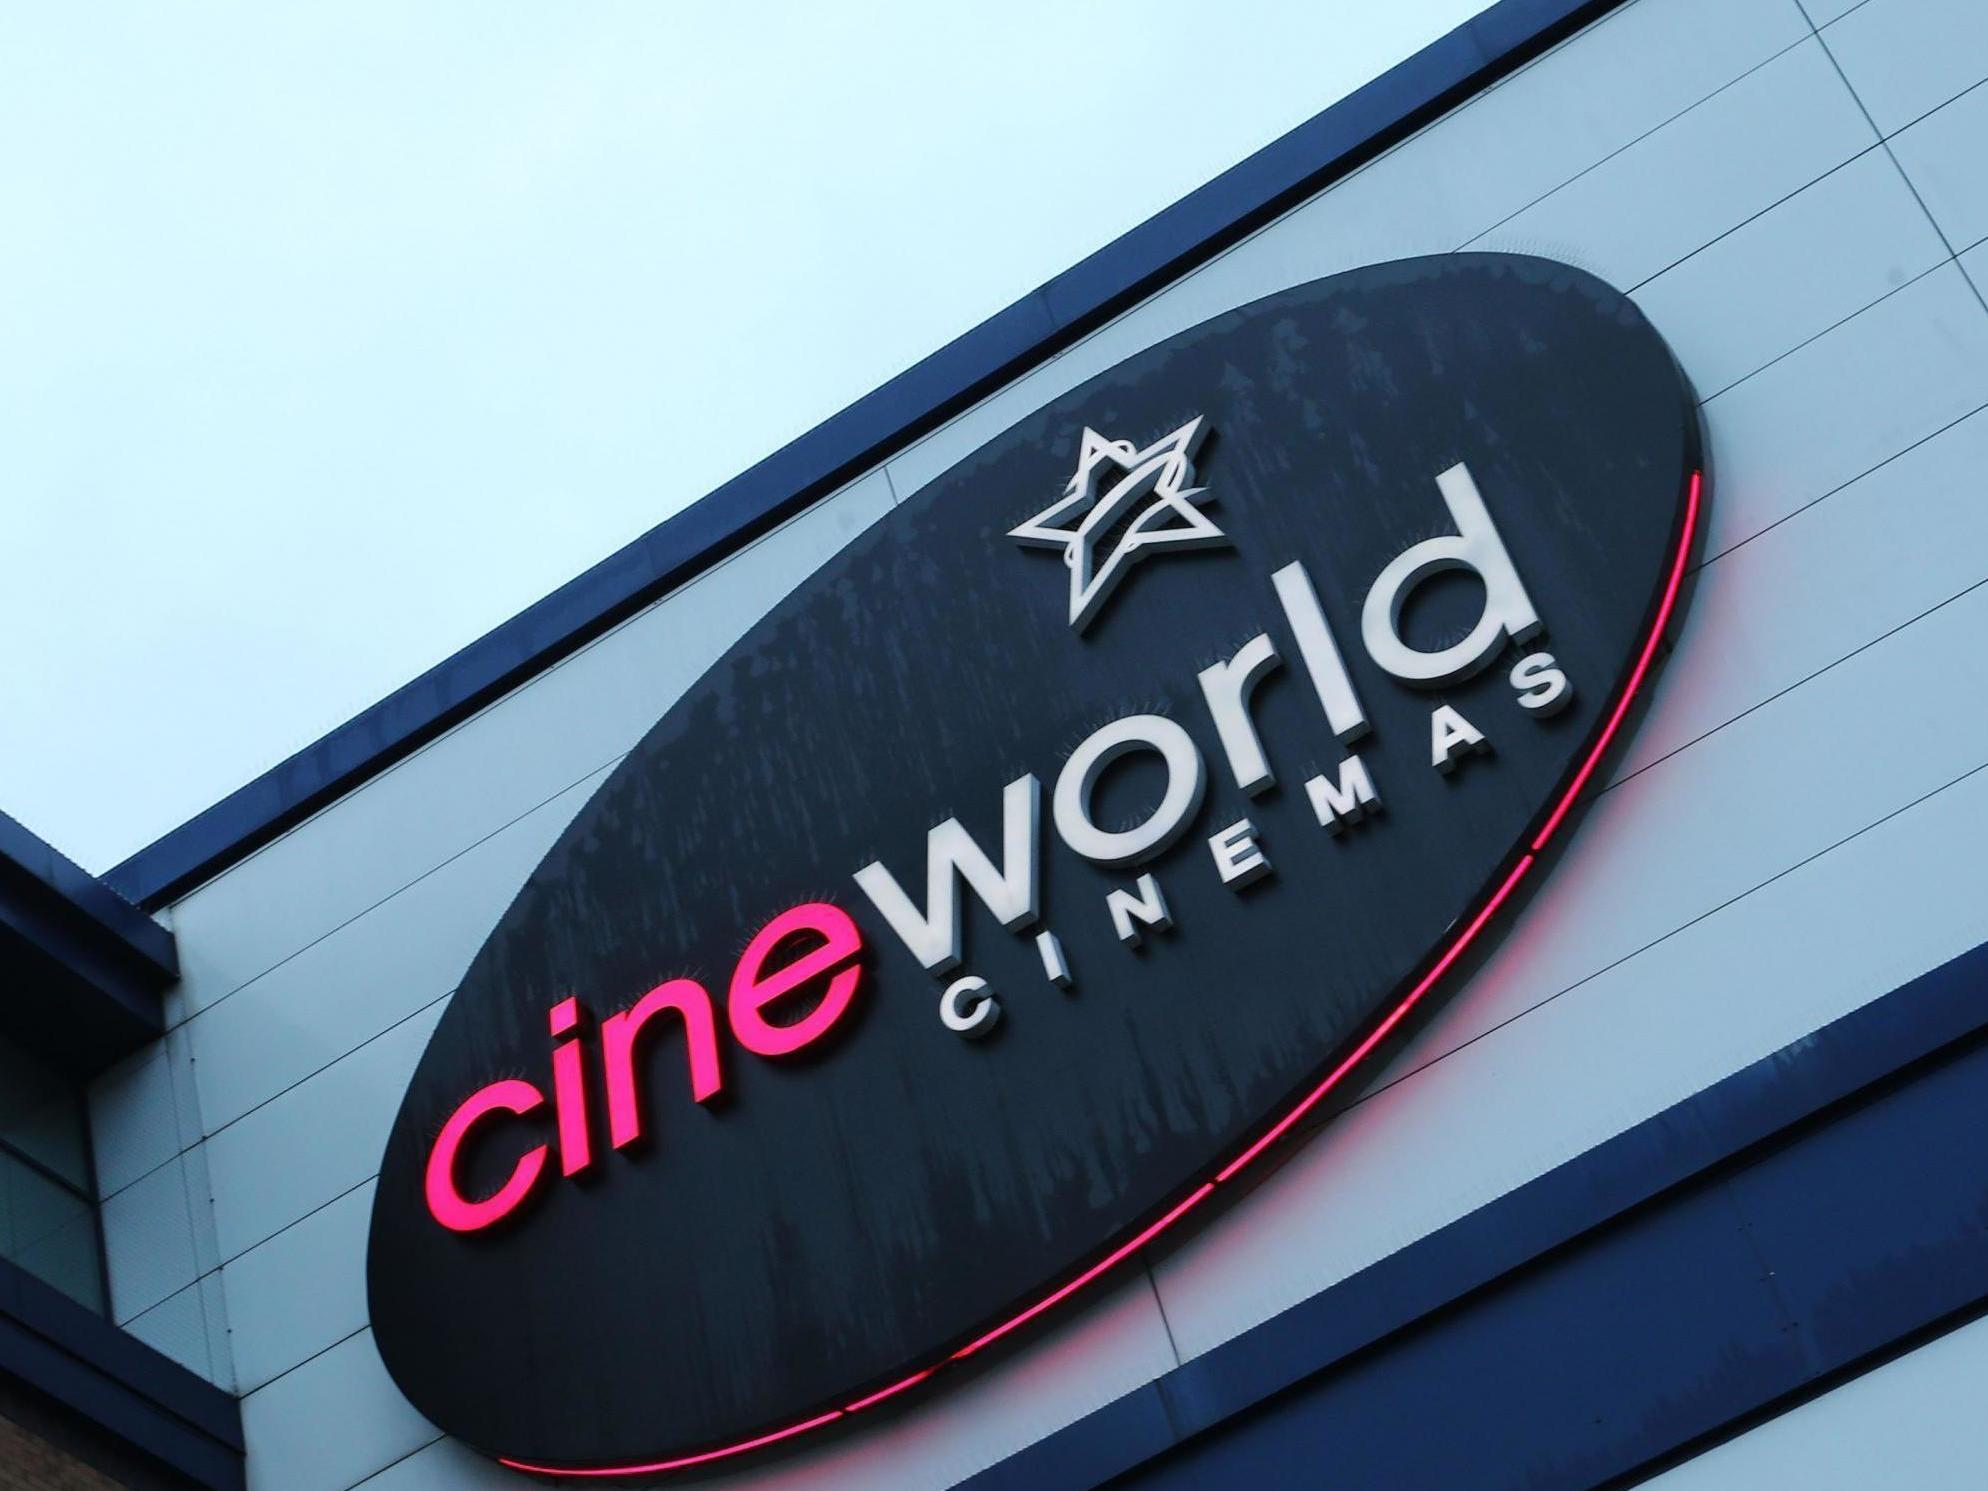 Cineworld criticises Odeon's 'historic' deal with Universal: 'It's the wrong move'